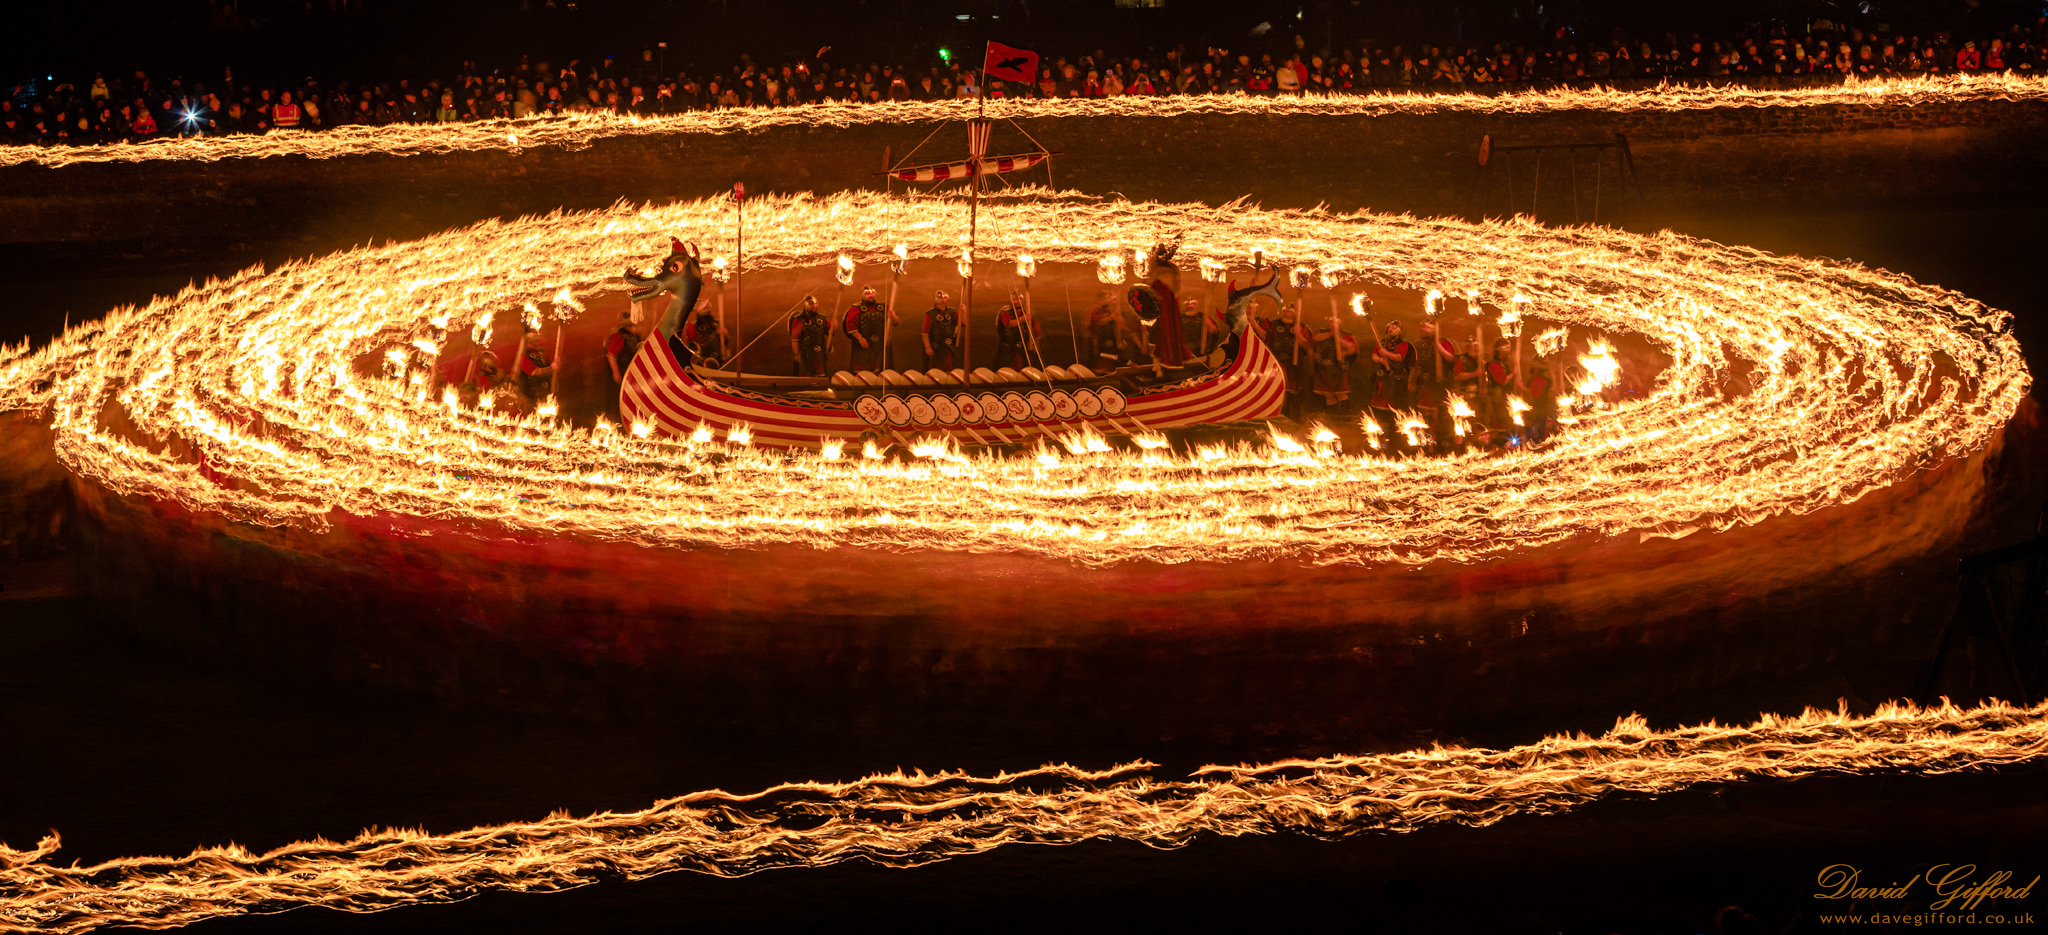 Up Helly Aa 2020: Burning Ring of Fire